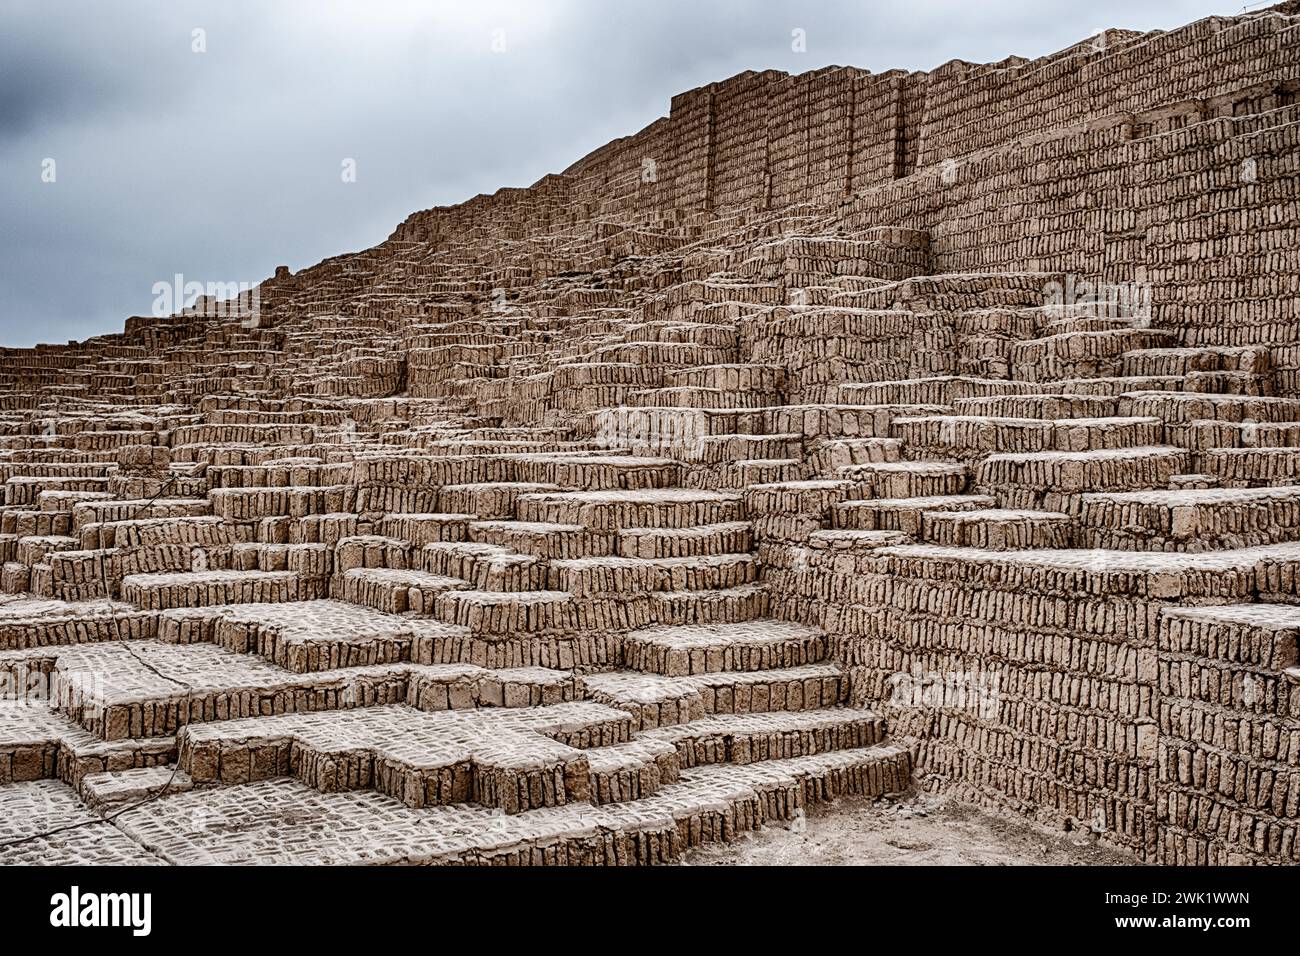 The Huaca Pucllana pyramid is constructed with tiers of adobe bricks as it rises to the sky in Lima. Stock Photo